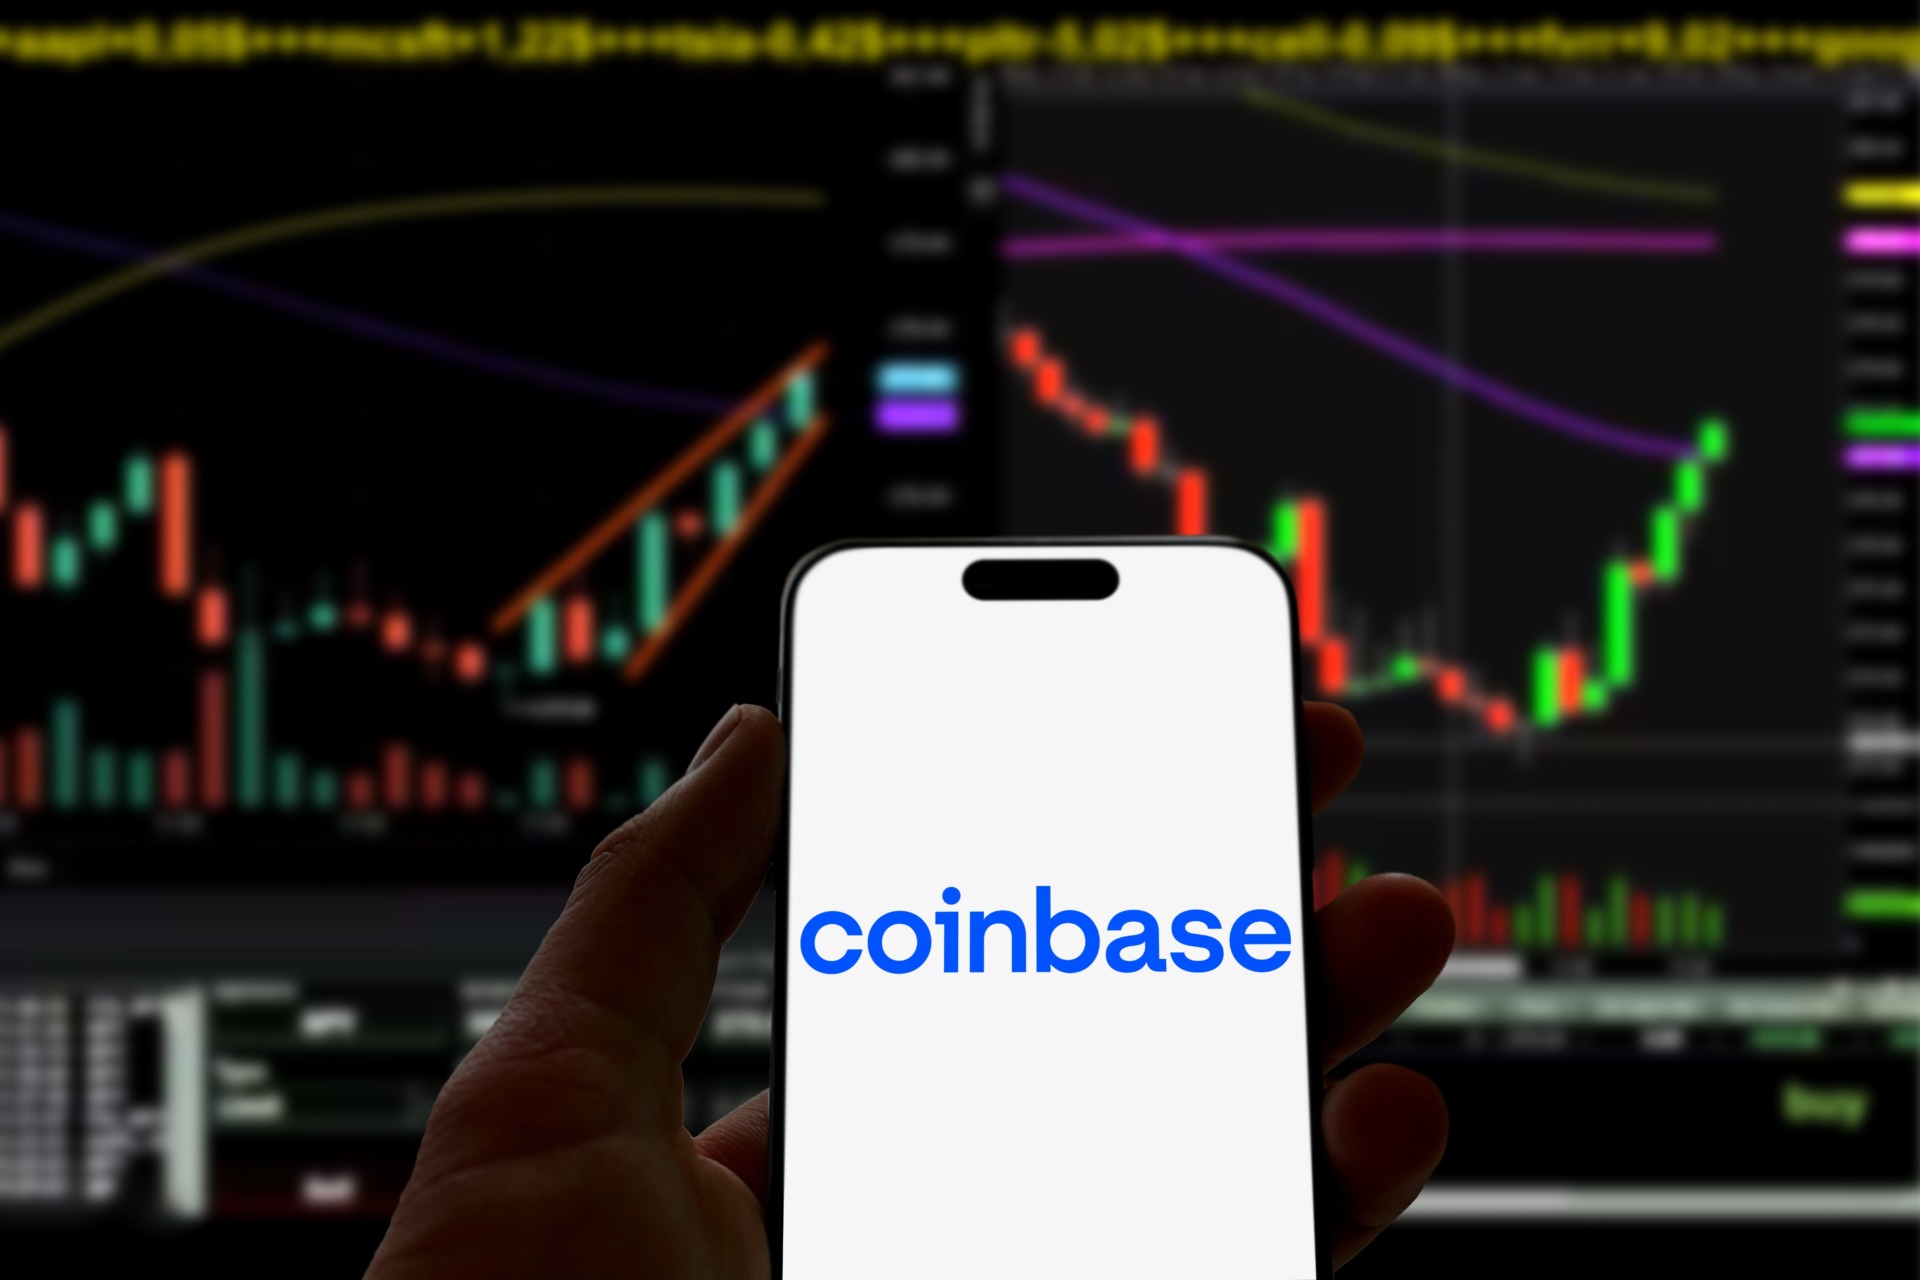 Coinbase CEO: Crypto Will Drive 25% of Global GDP Within Decade